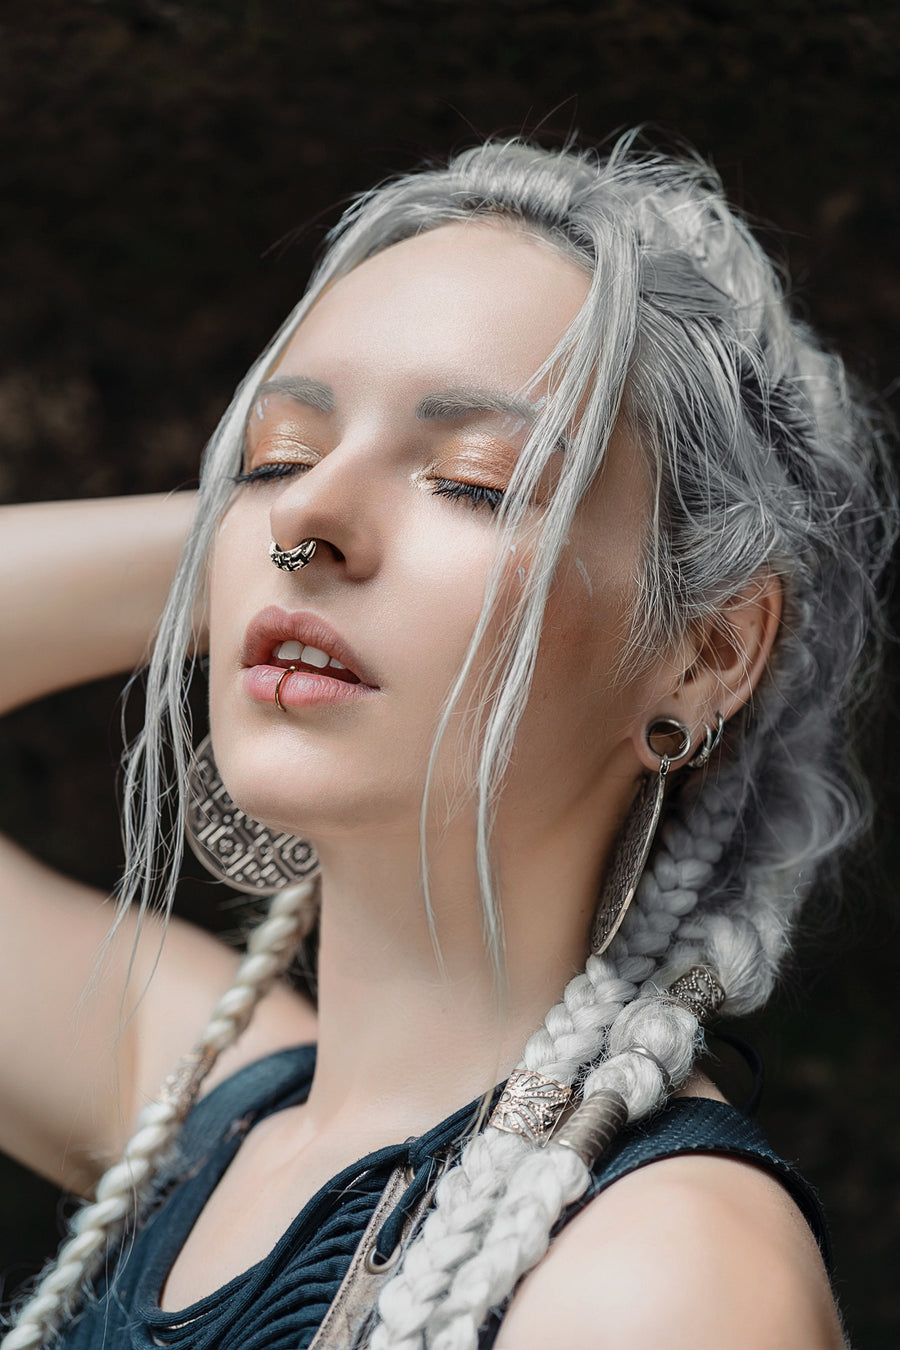 Silver geometric patterned earrings and septum displayed against a black background, emphasizing the detailed Shipibo design.